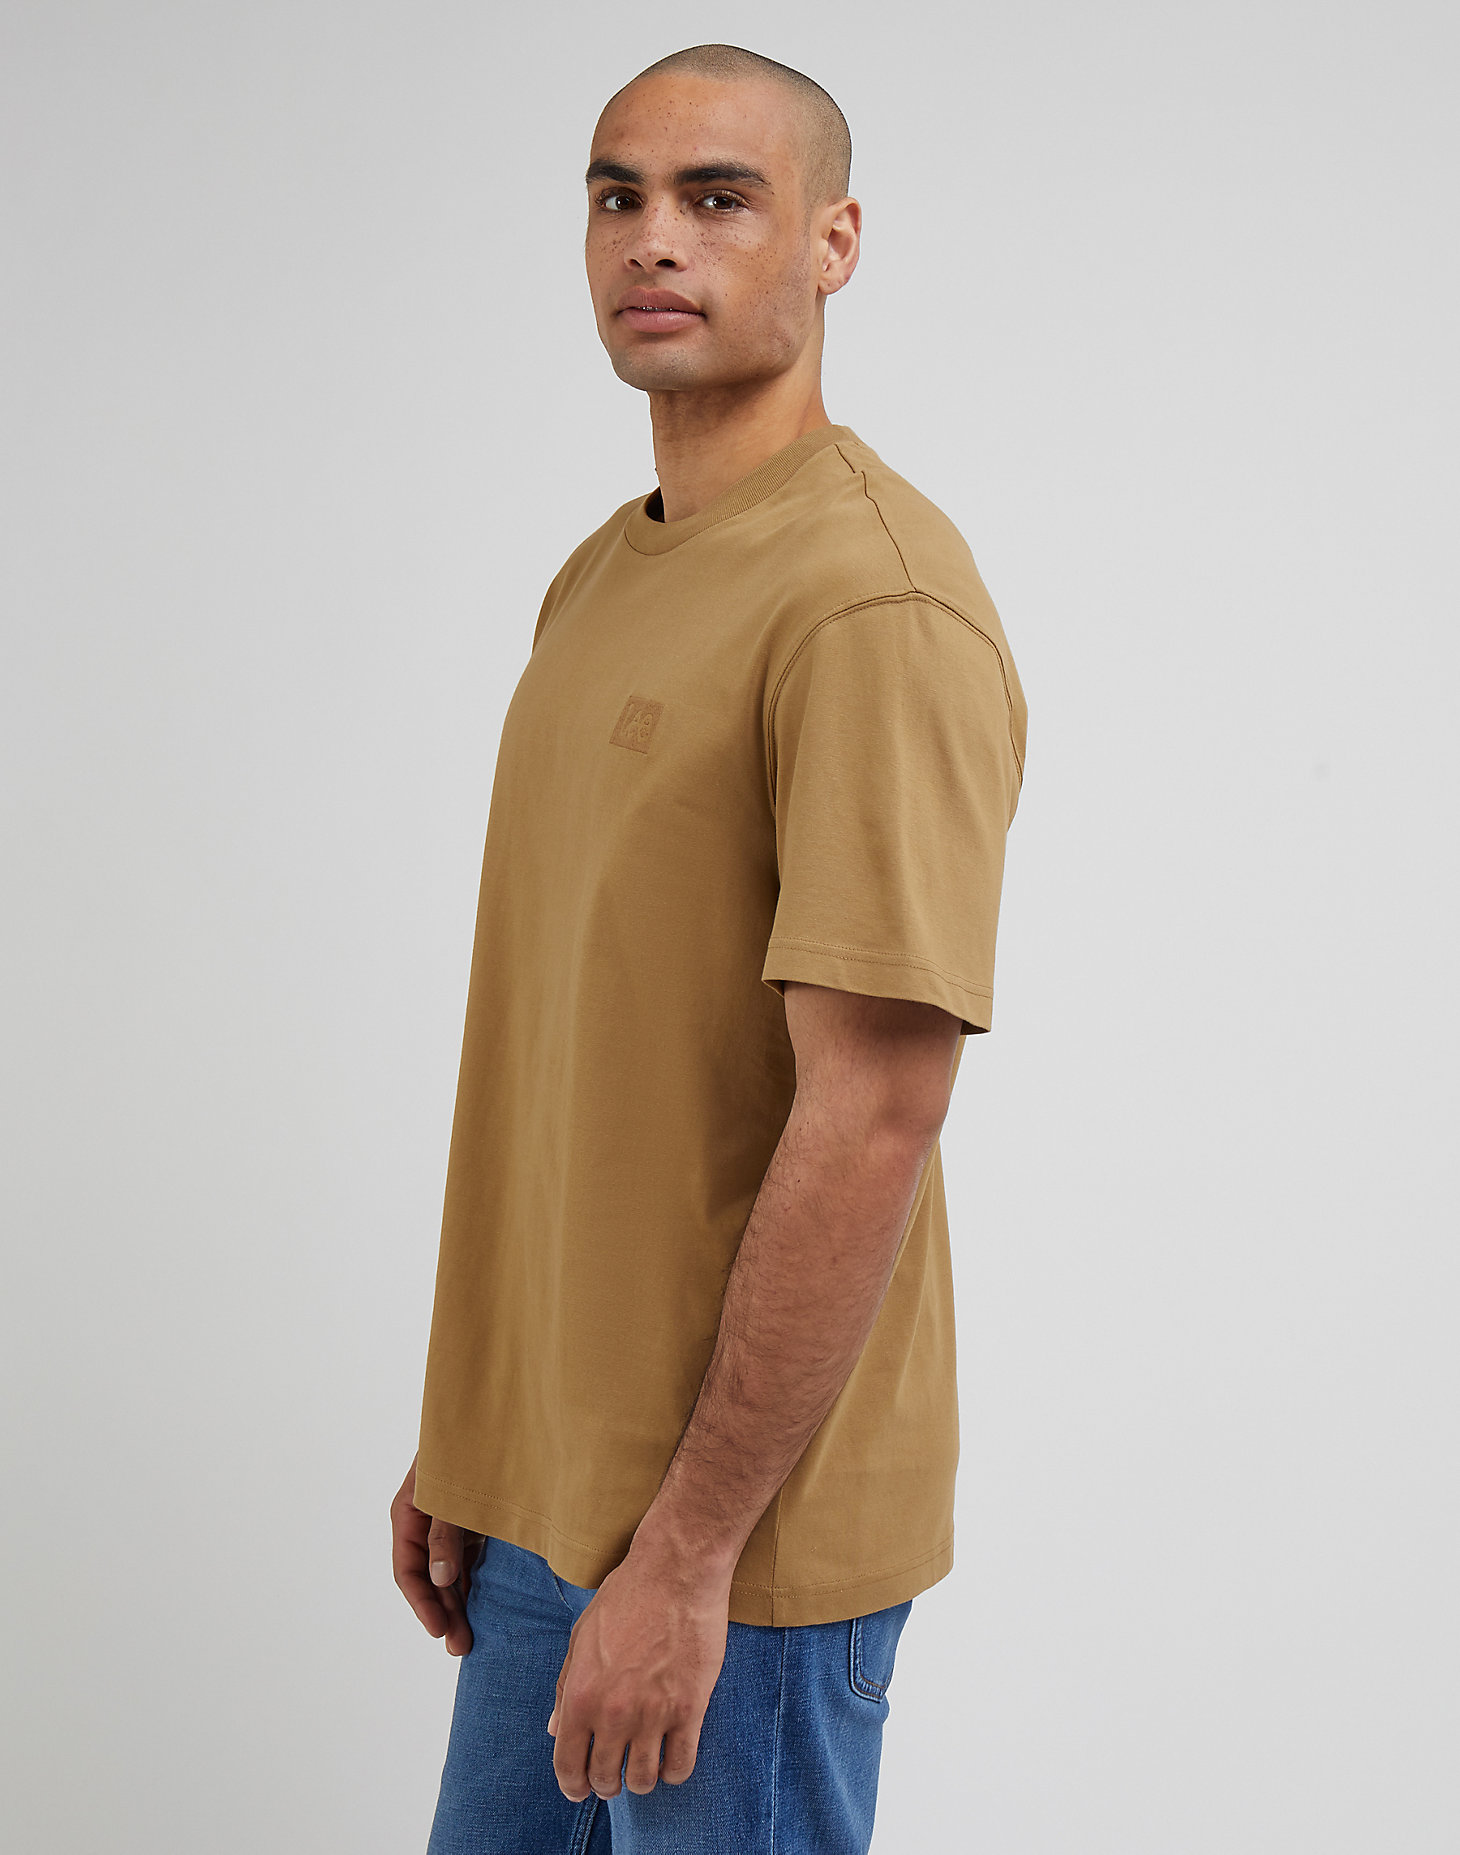 Plain Loose Tee in Clay alternative view 3